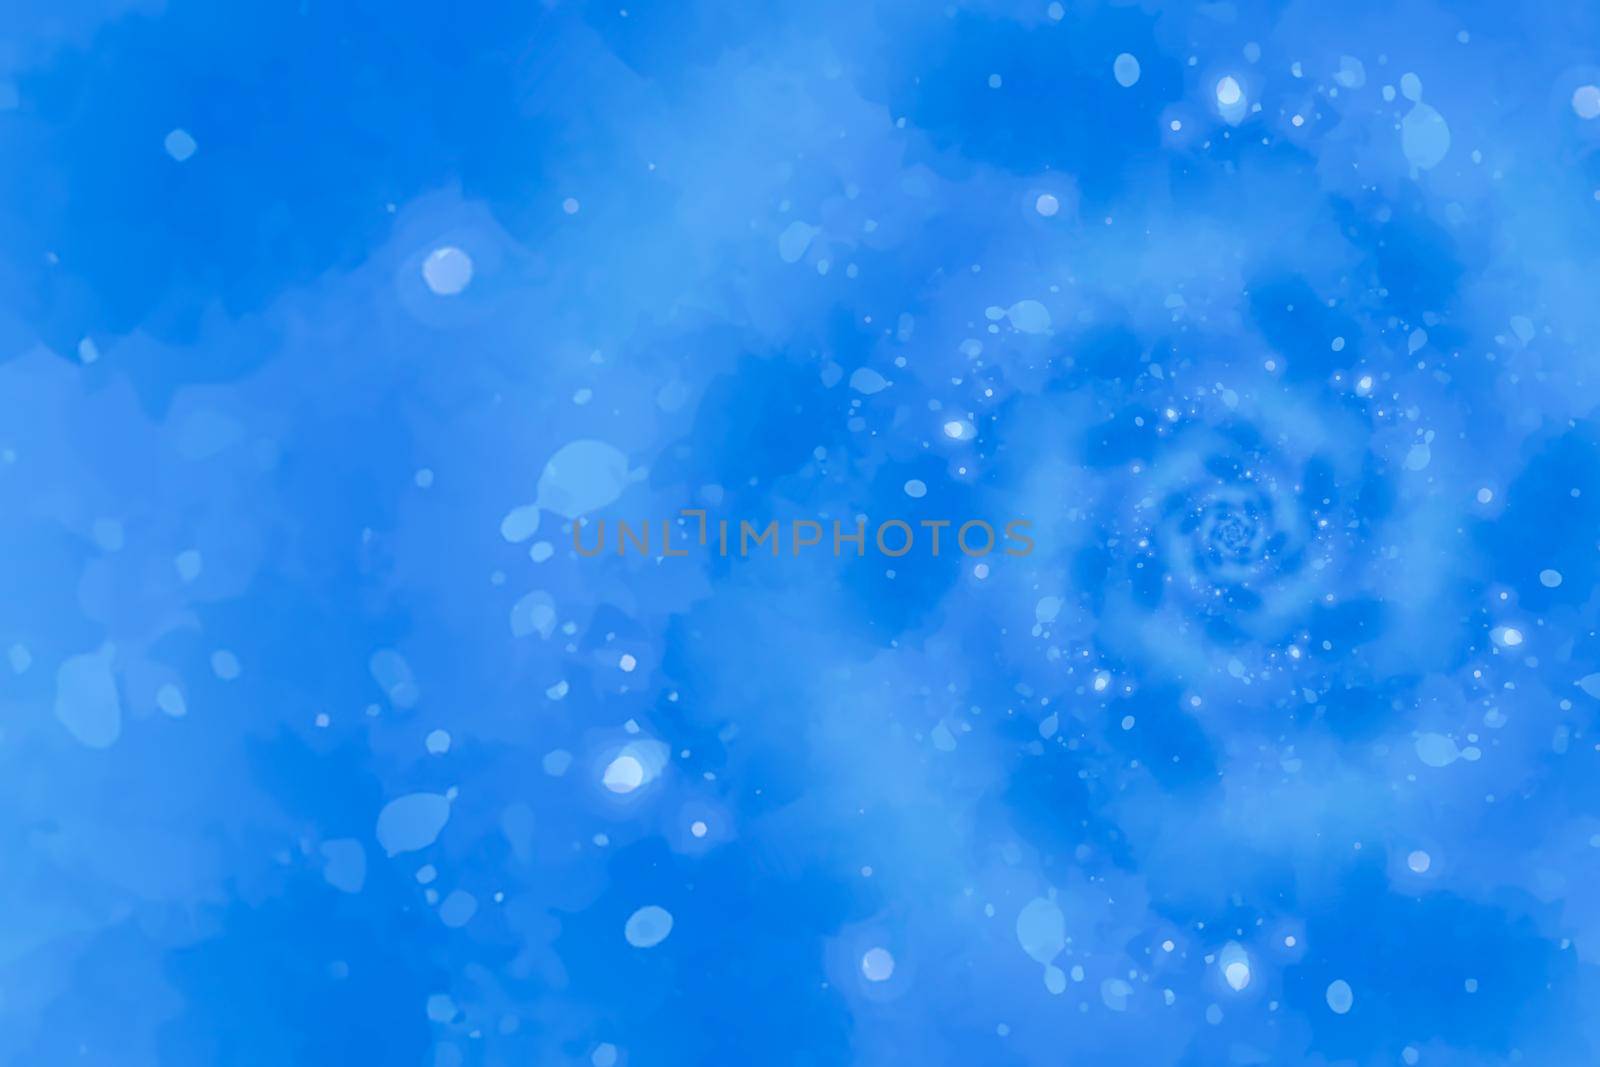 Starry blue background illustration with vortex design psychedelic shape by Perseomedusa